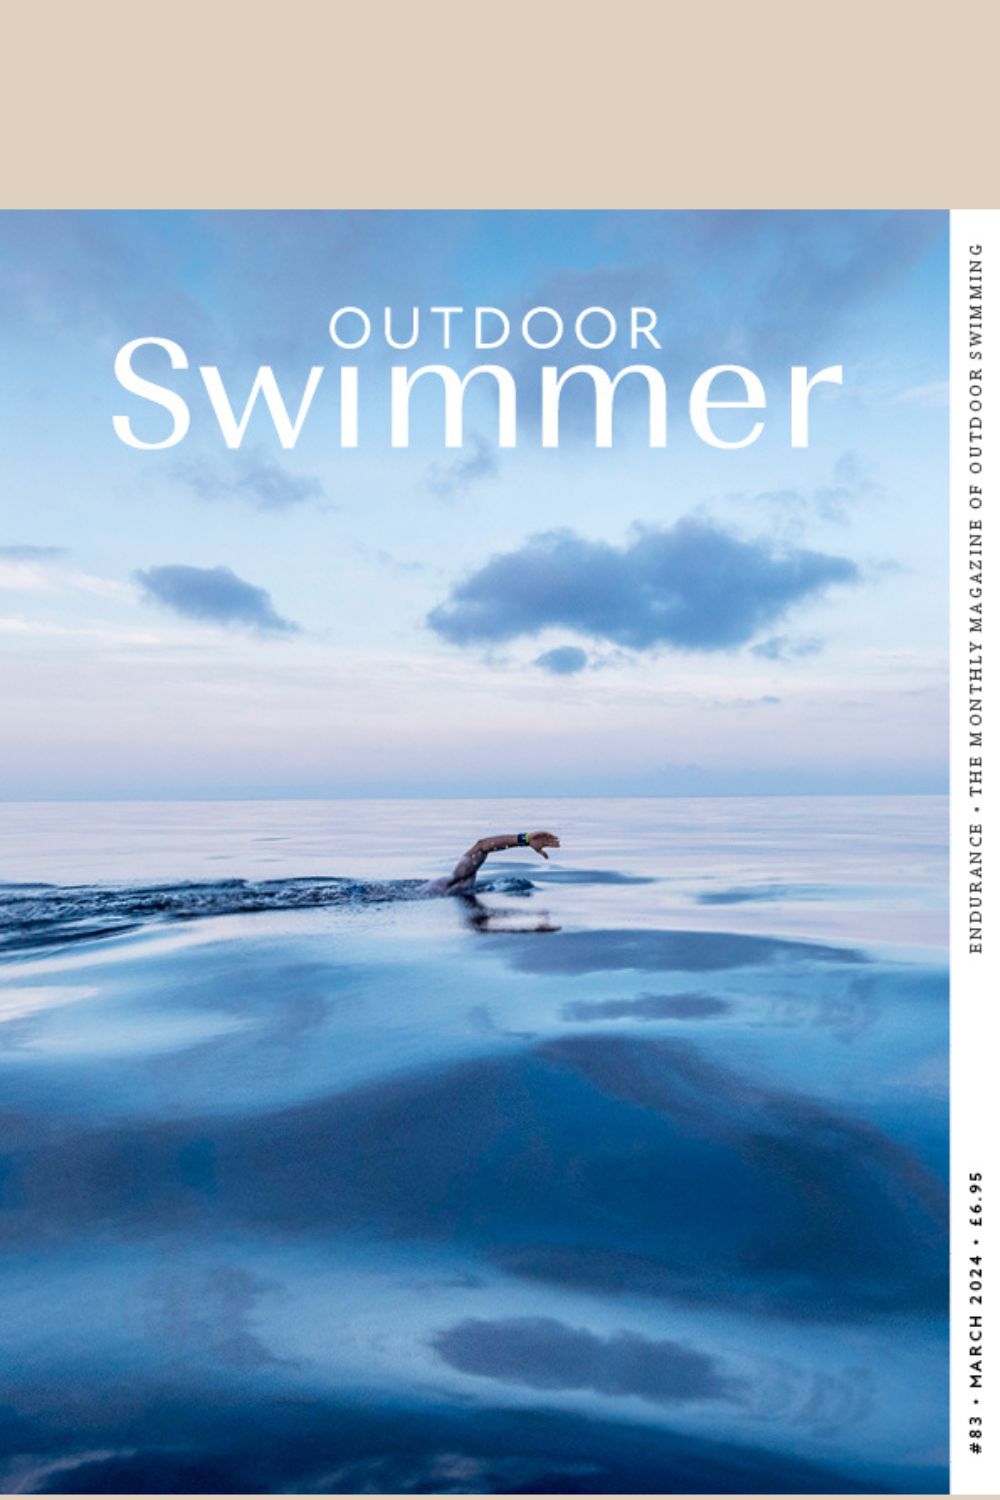 Outdoor Swimmer Magazine cover Issue 83